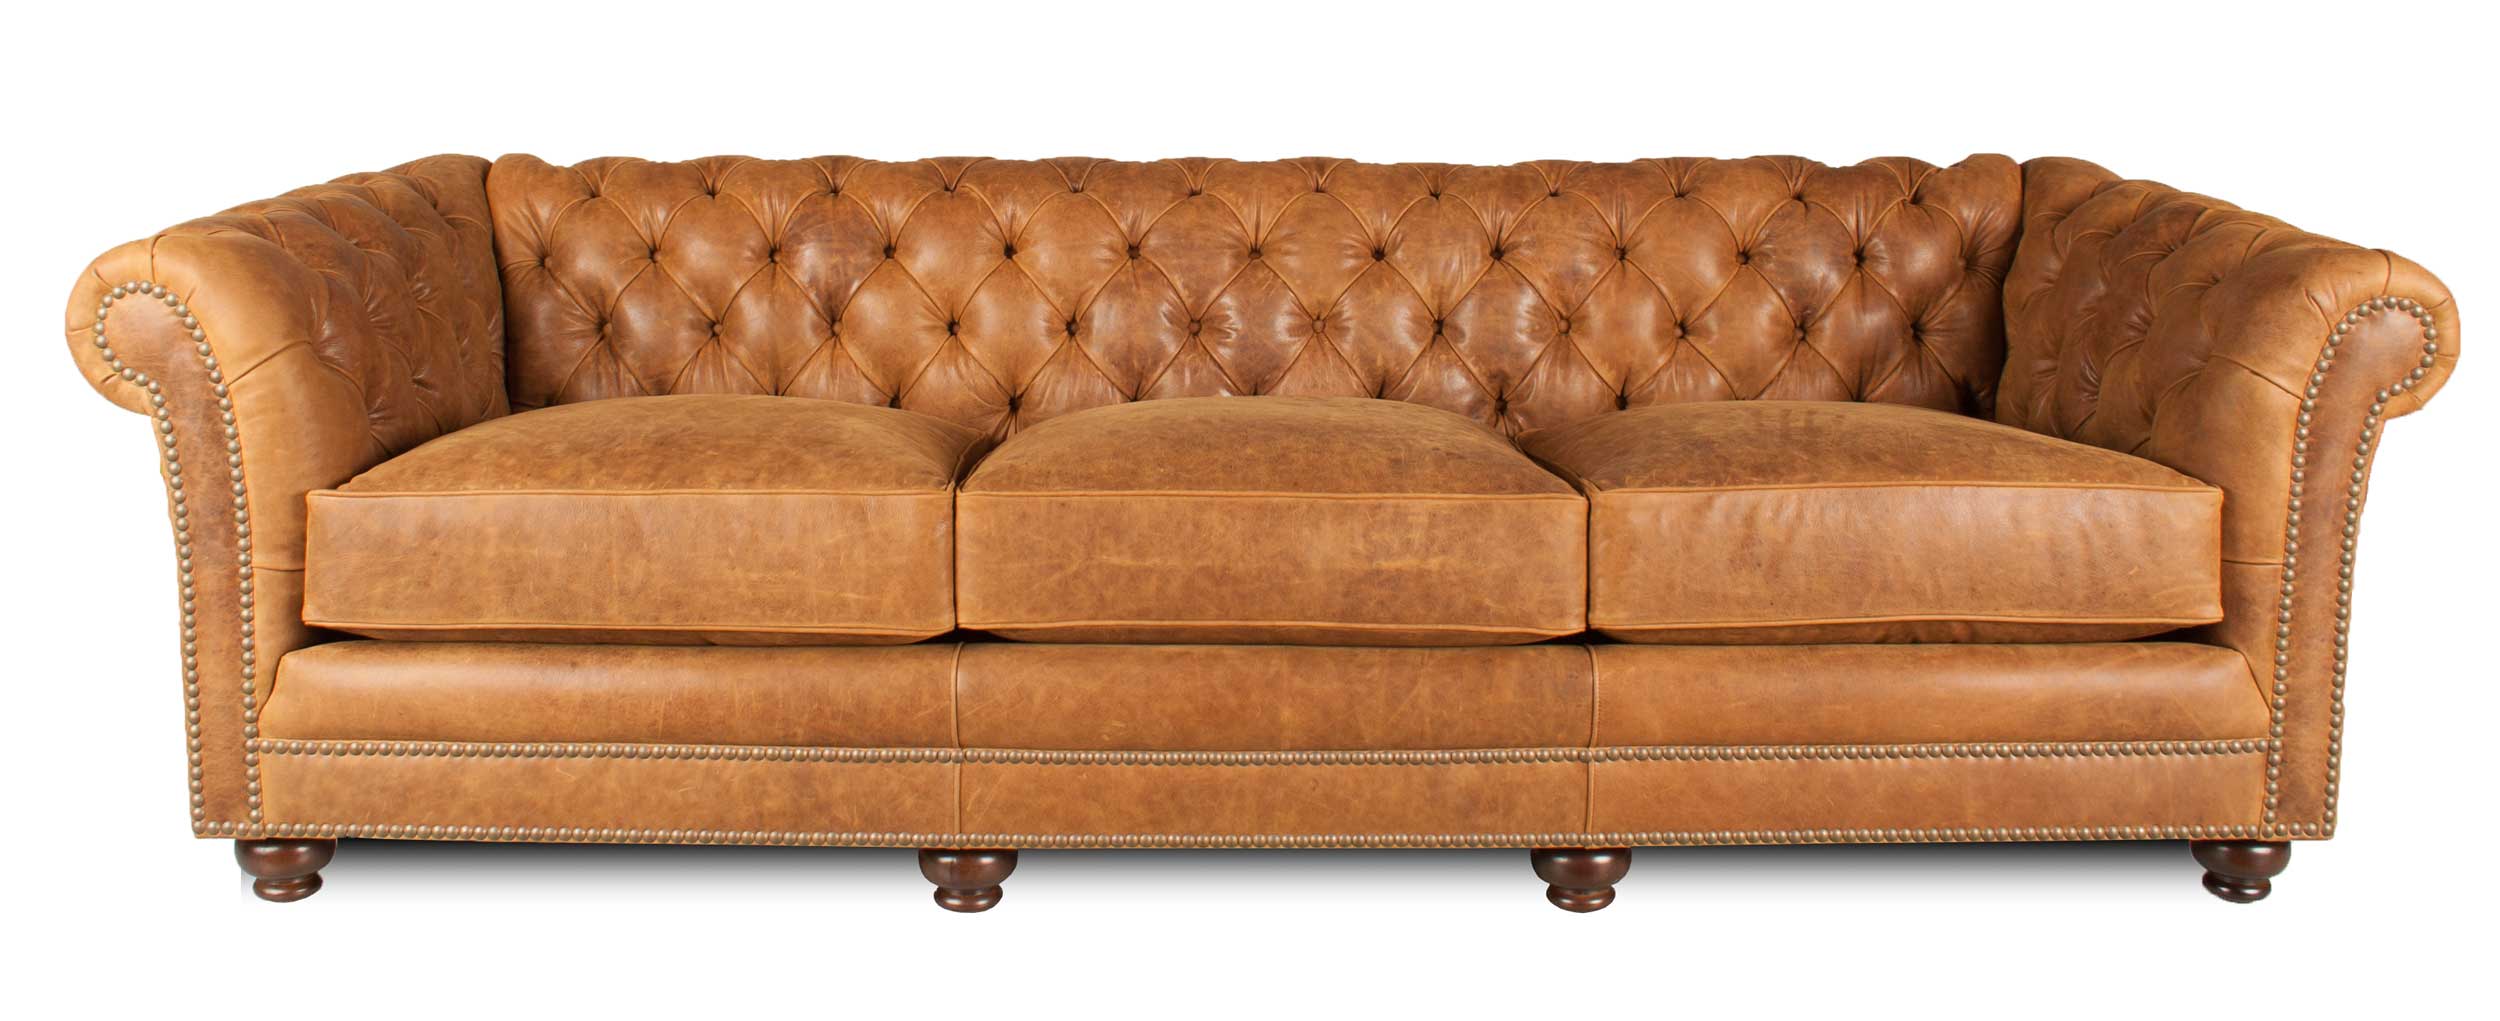 Deep Seated Sofas For The Big And Tall, Extra Long Tufted Leather Sofa